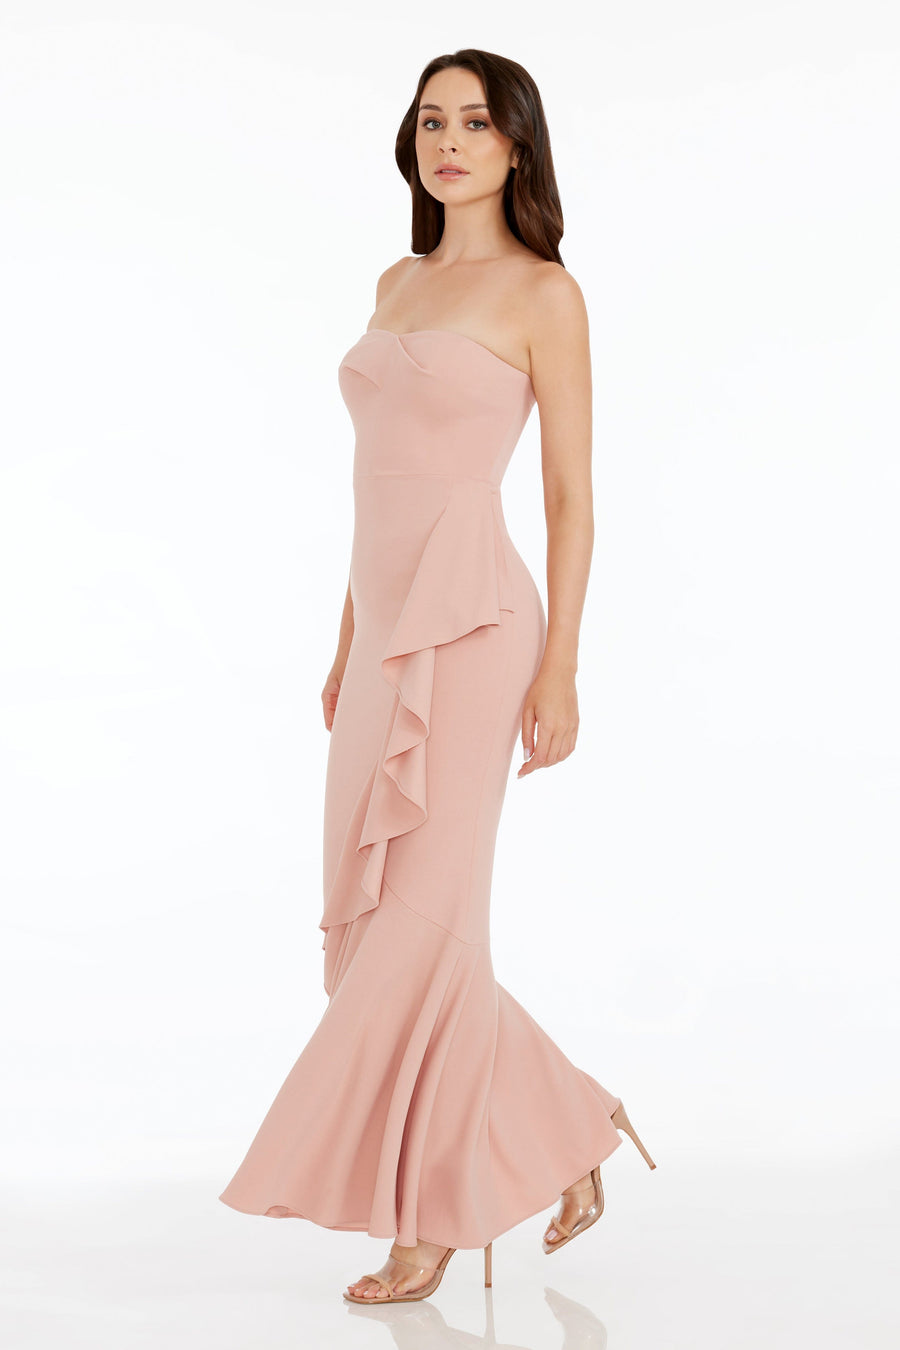 The Champagne Ruffle Gown – Selkie